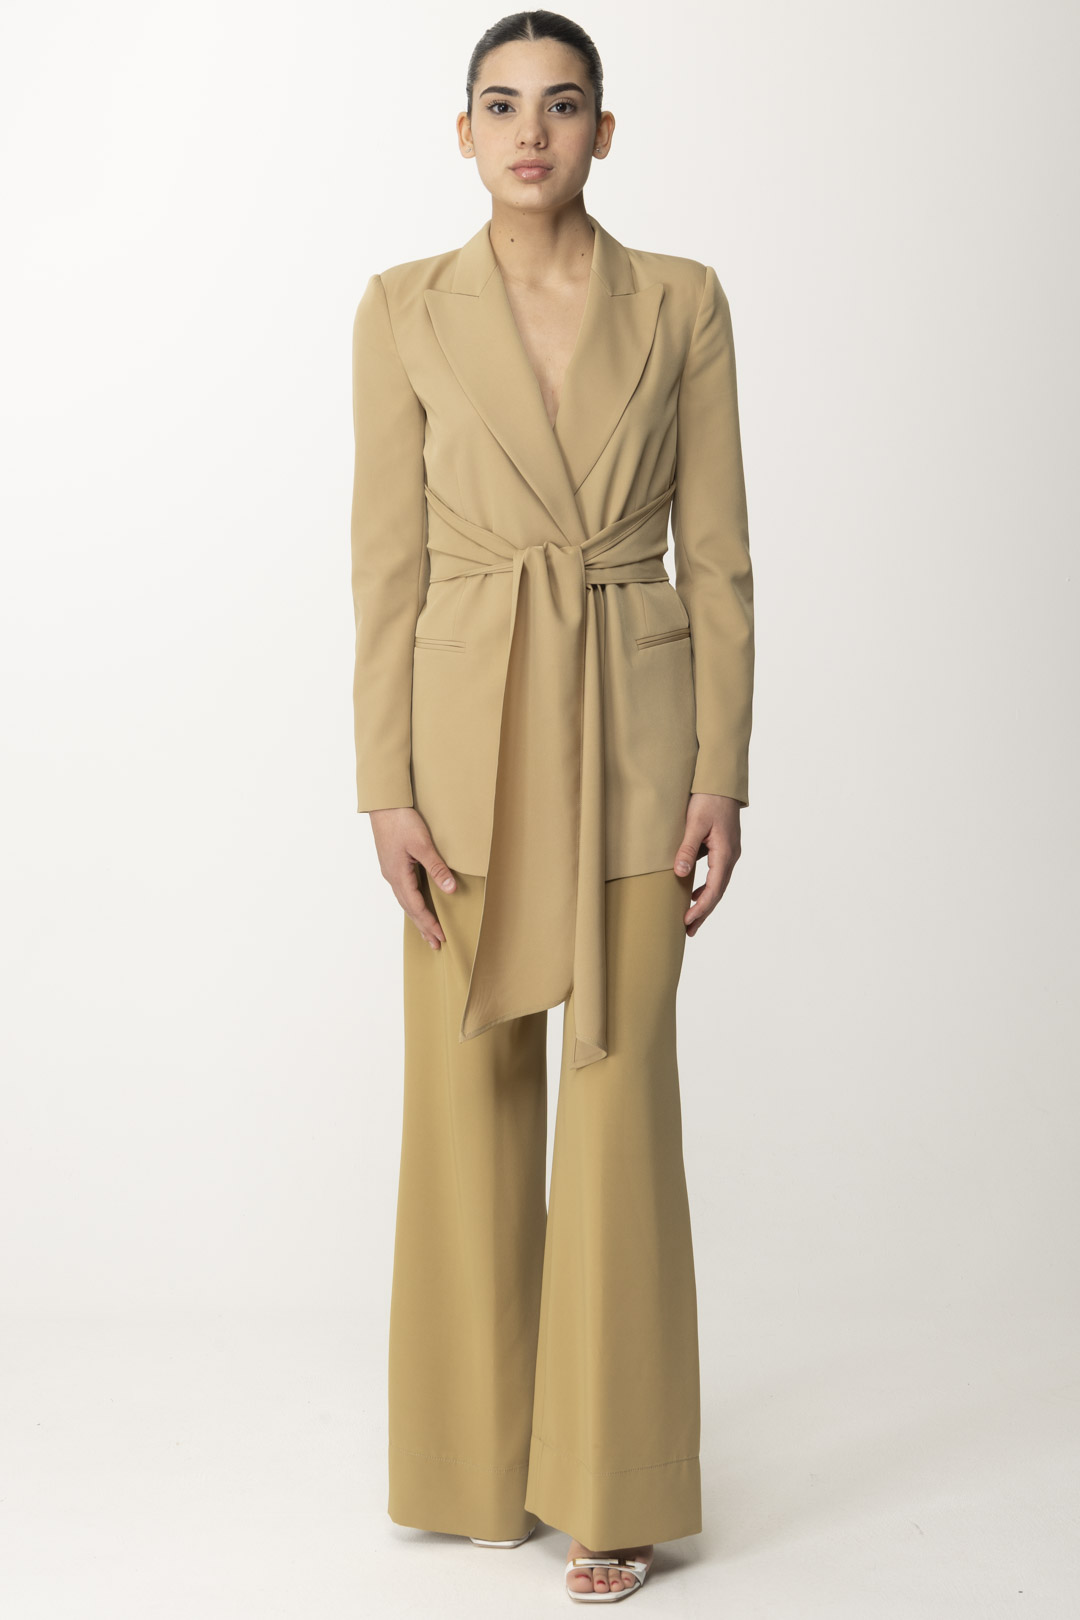 Preview: Aniye By Jacket with Kelly sash Camel